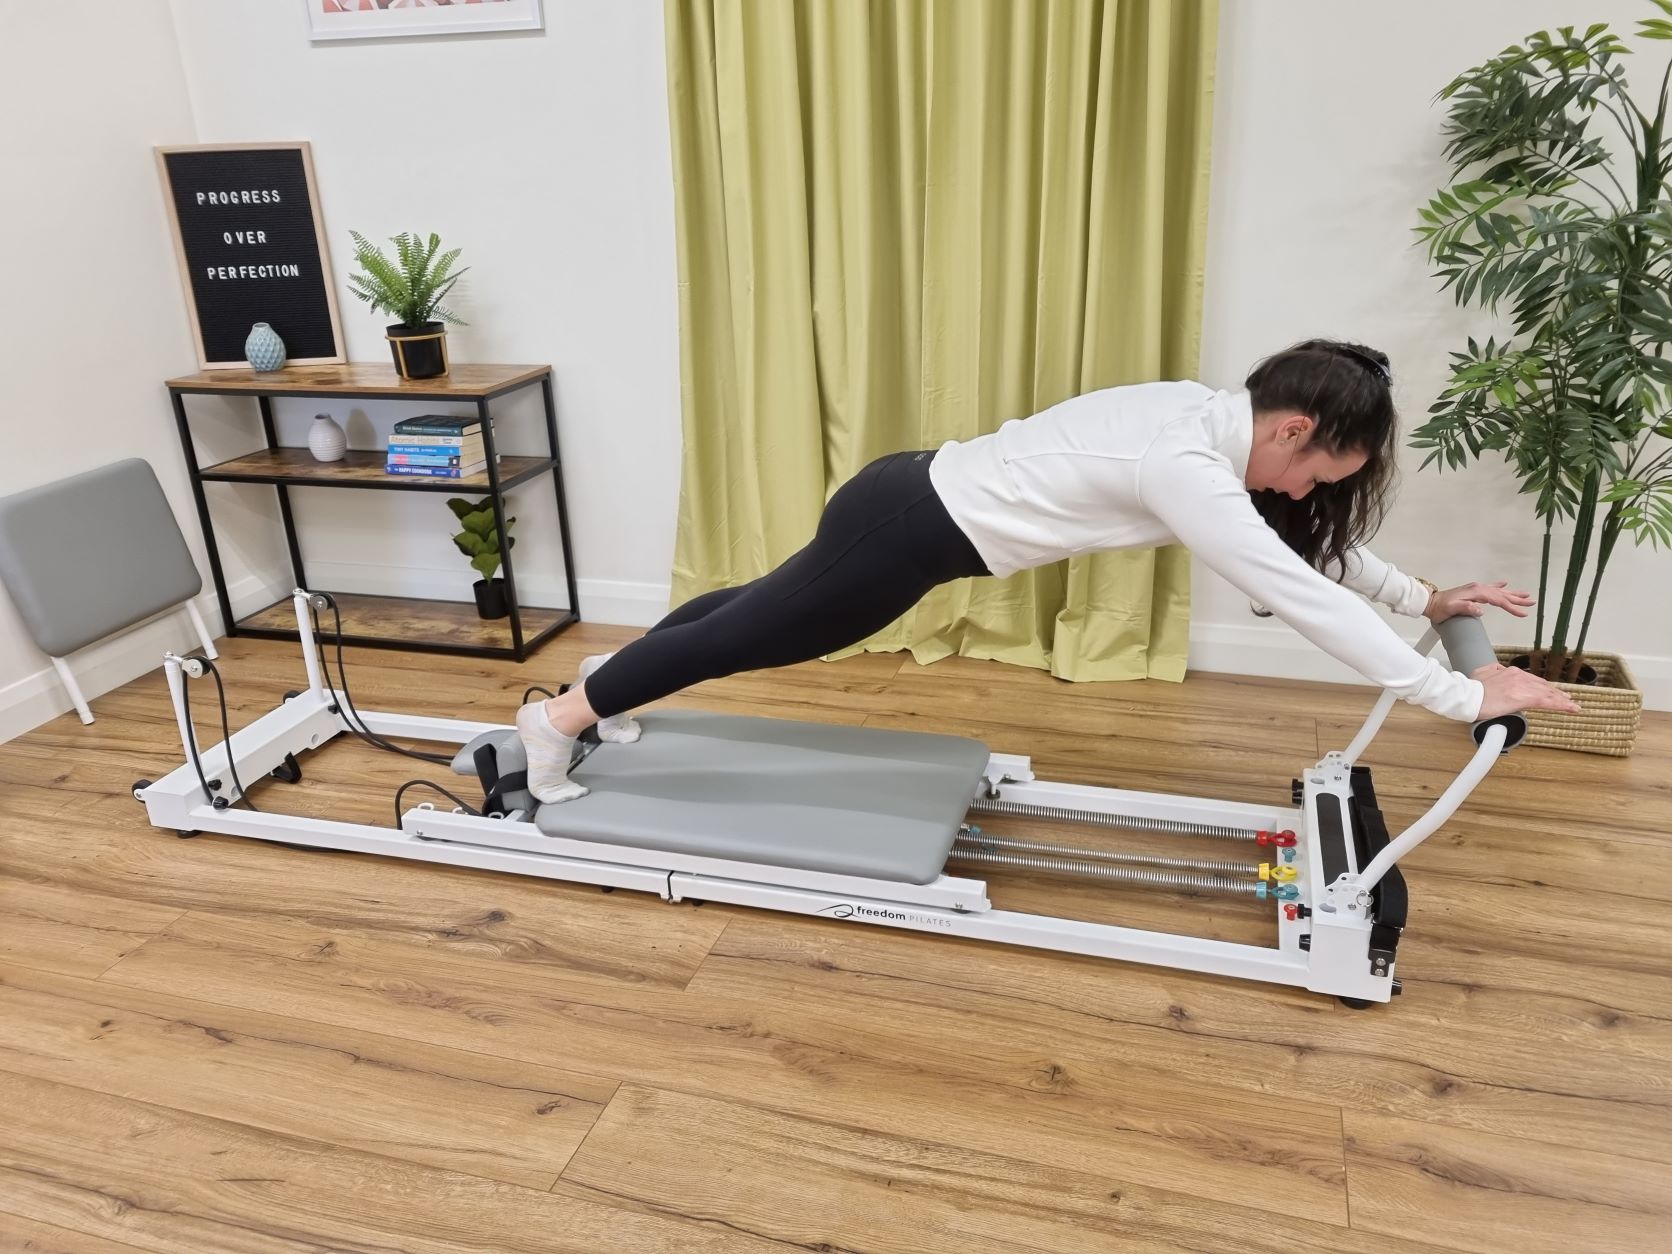 https://freedompilates.co.nz/wp-content/uploads/2021/07/HP-low-res.jpg